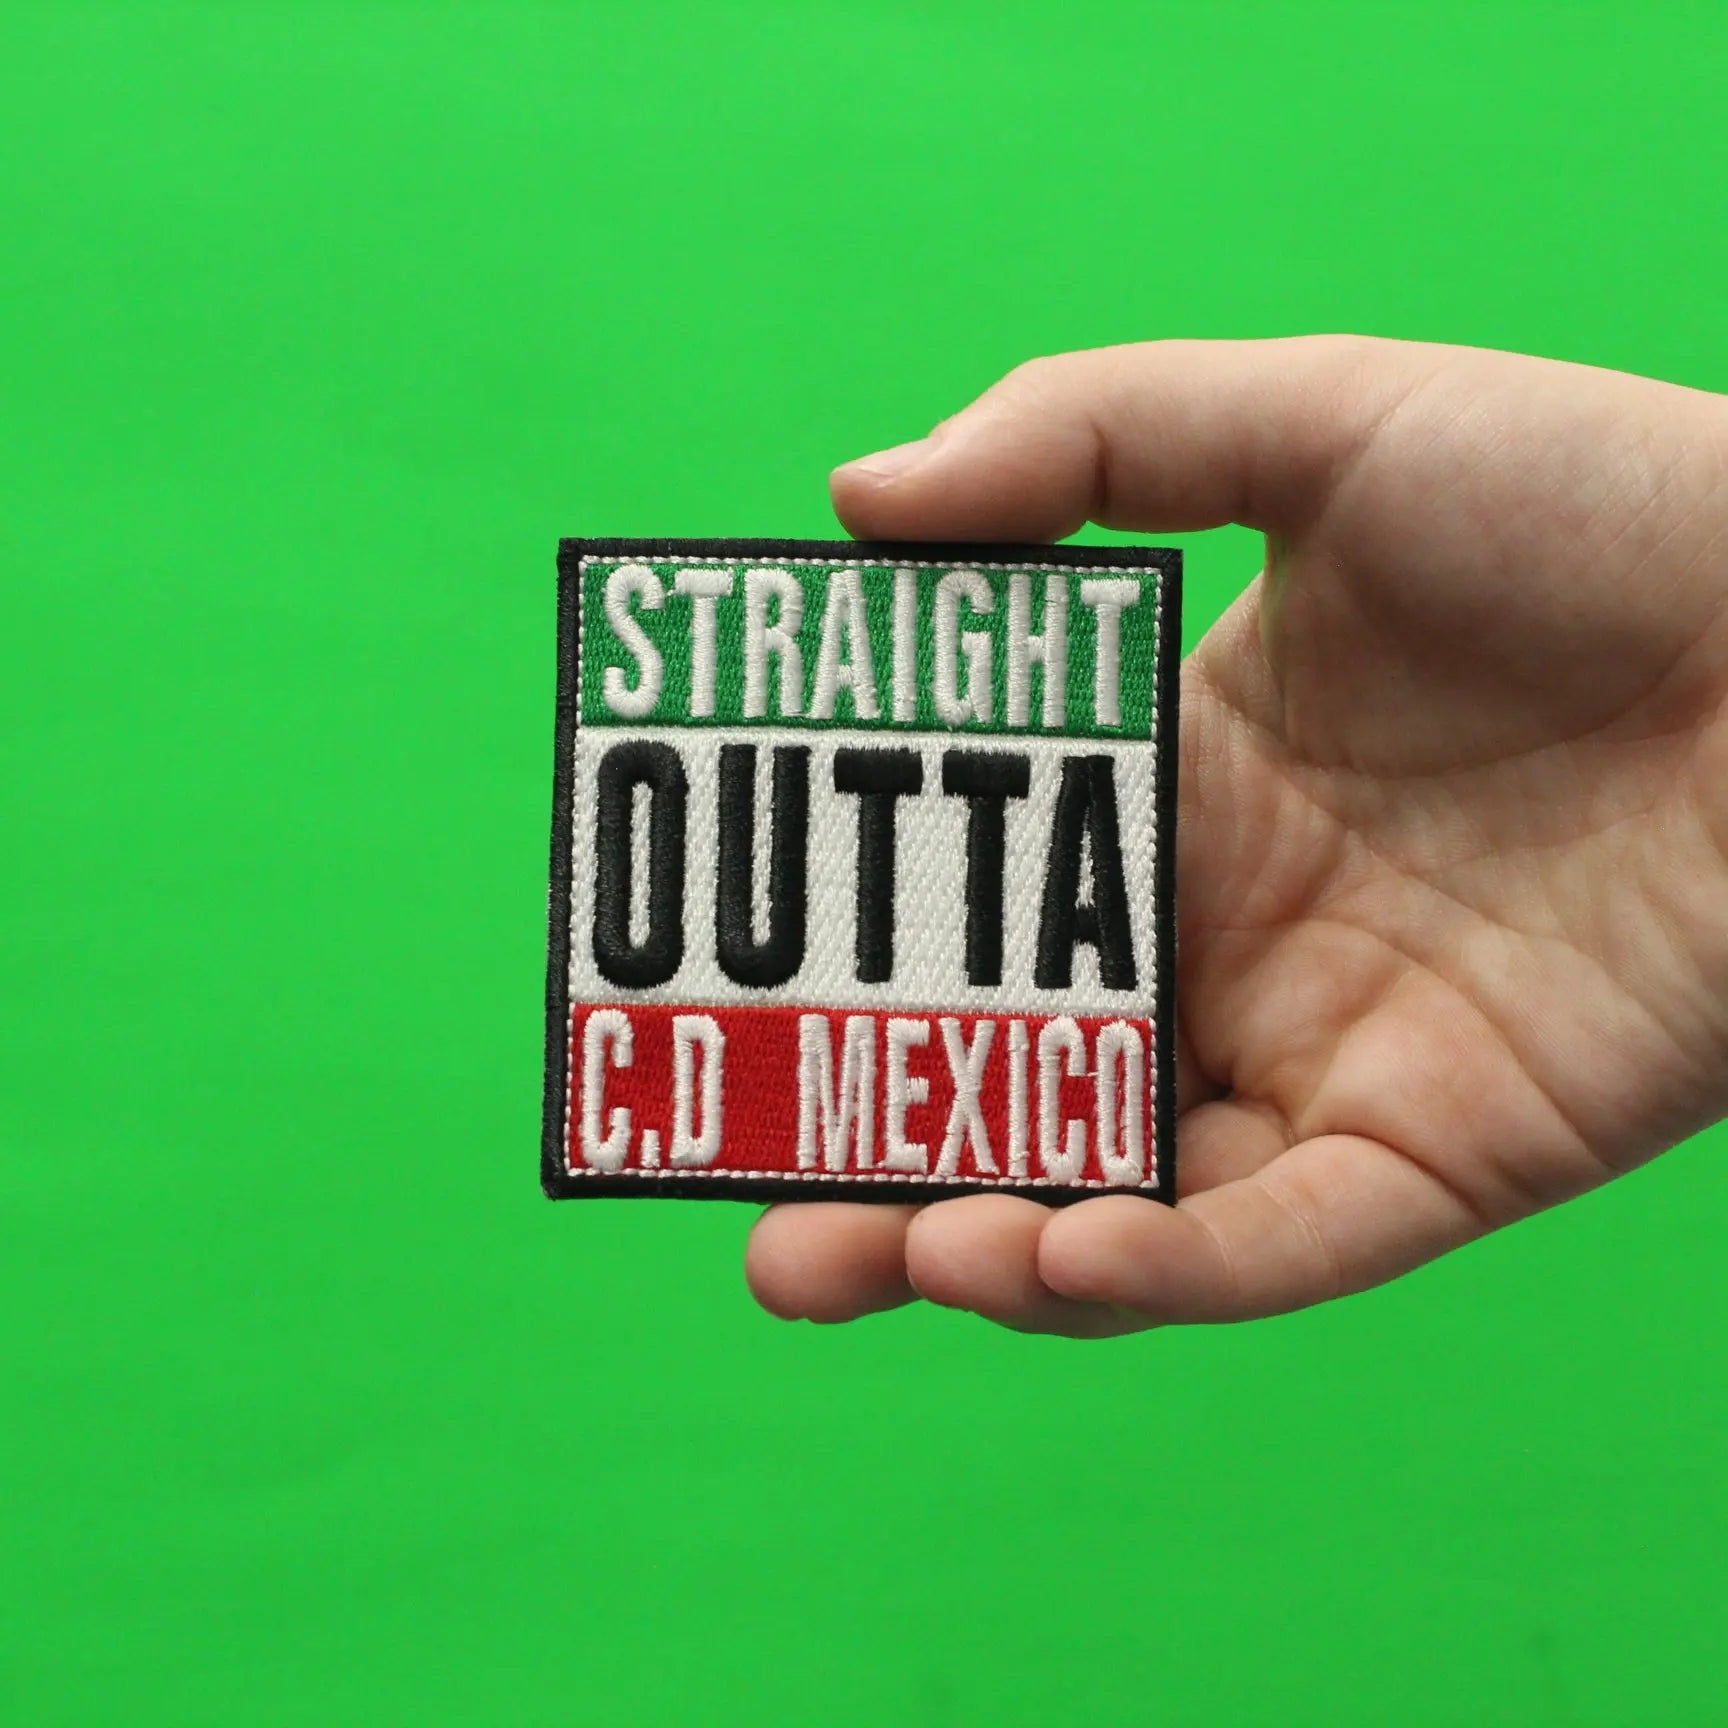 Straight Outta C.D Mexico City Embroidered Iron On Patch 